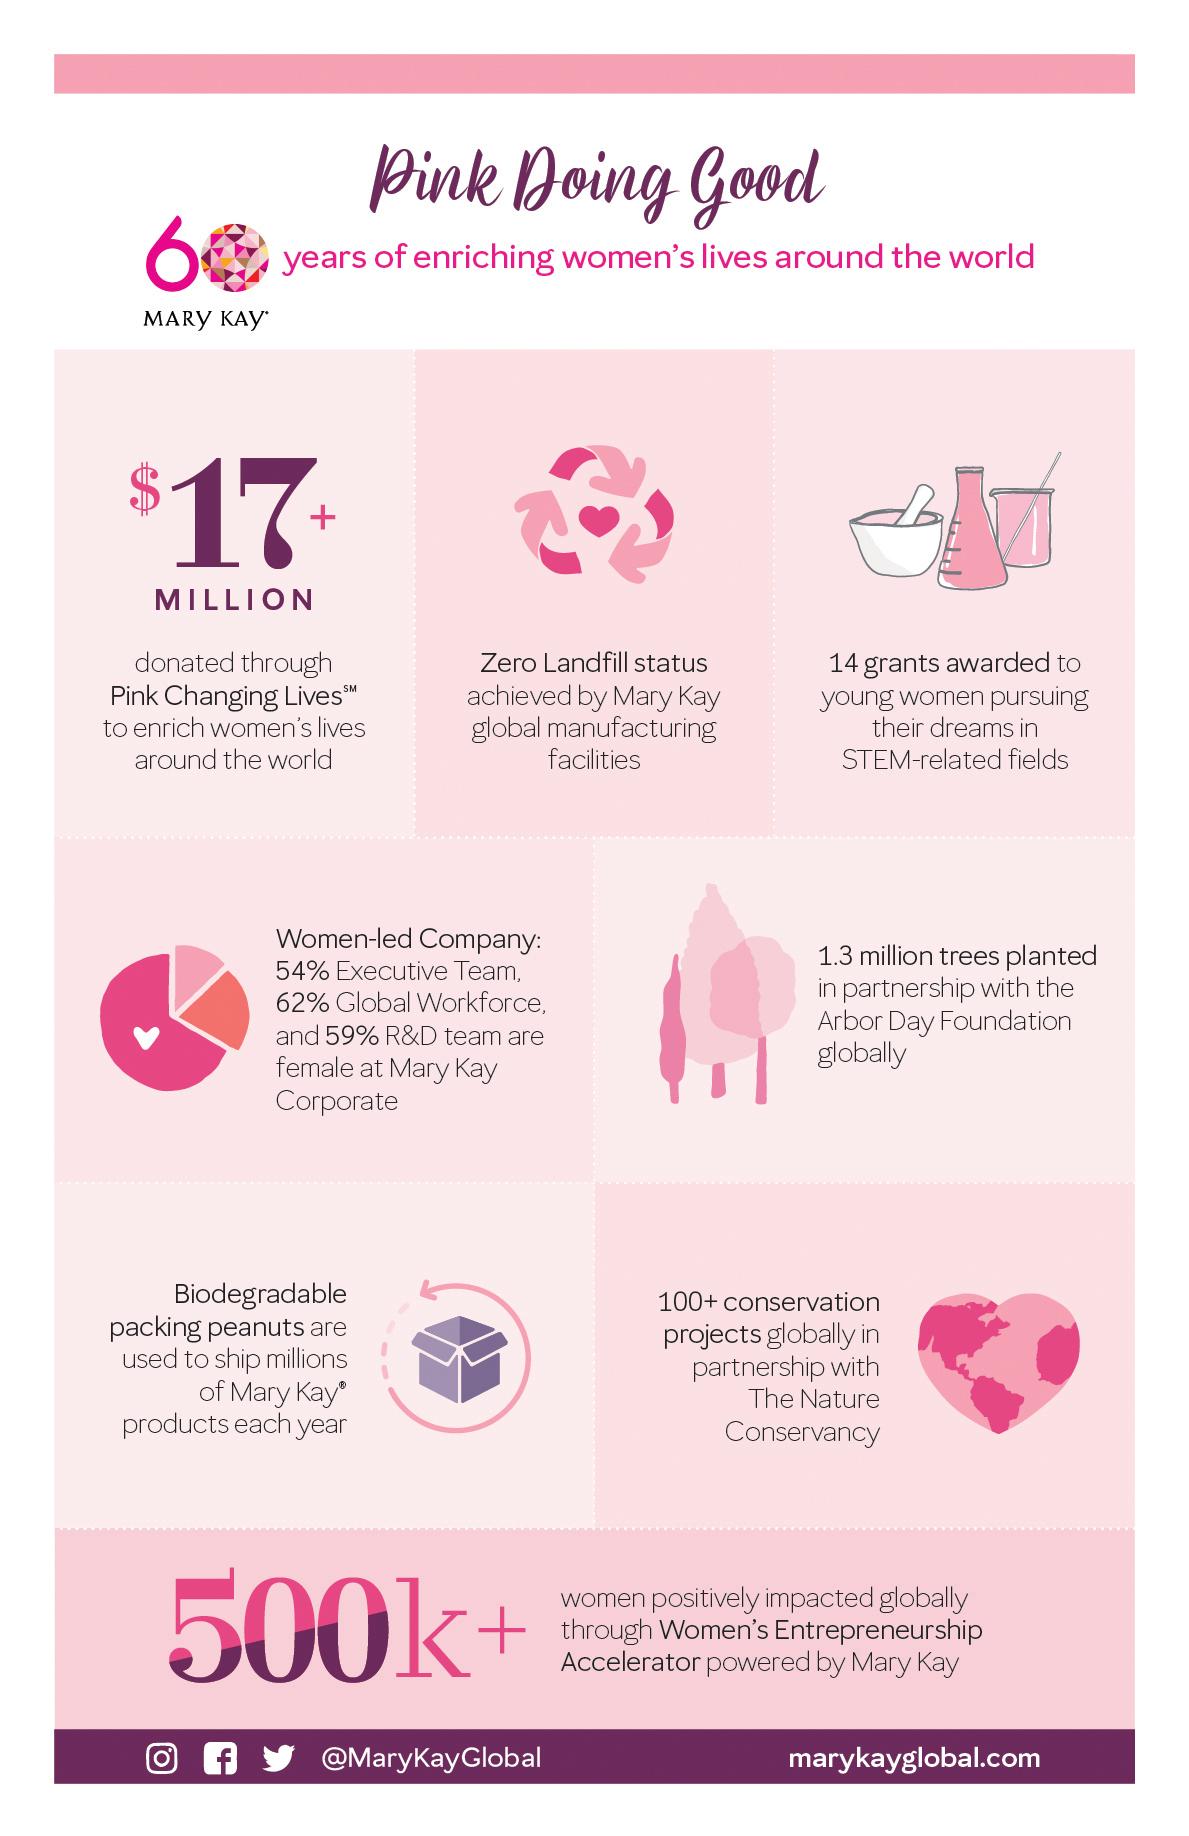 "Pink Doing Good: 60 years of enriching women's lives around the world" Infographic